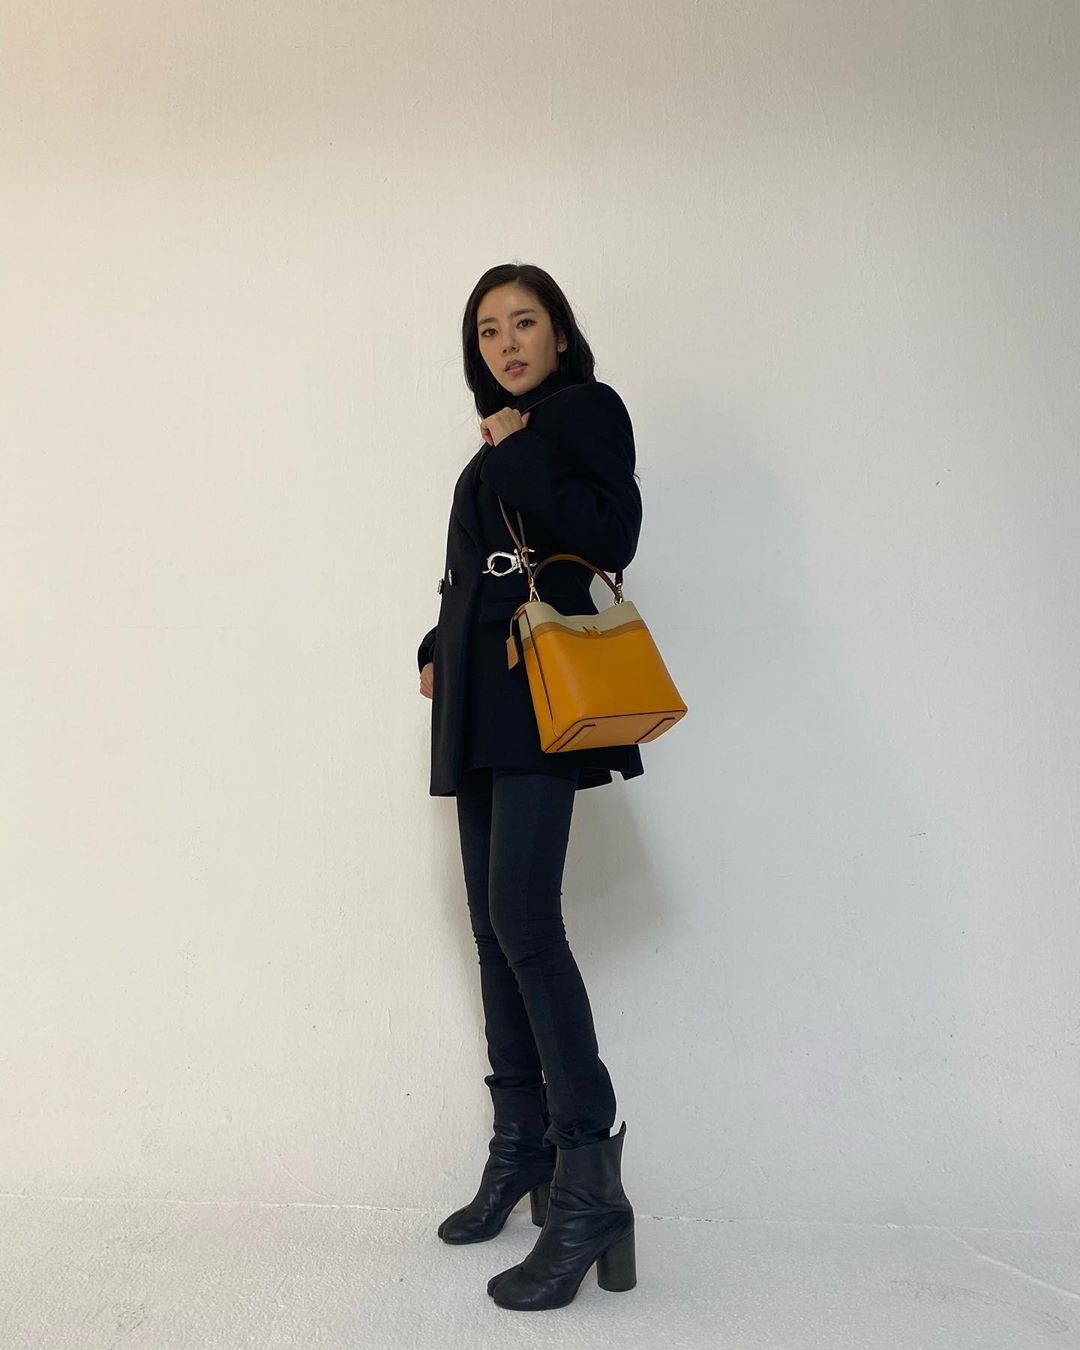 Son Dam-bi has revealed his sophisticated current situation.On the 10th, Son Dam-bi posted two photos on his instagram  and posted The picture was good.In the photo, Son Dam-bi is wearing an all-black suit and wearing a brown bag and standing on his side looking down at the Camera. The next photo is a top shot, and Son Dam-bi is looking at the Camera with his mouth slightly open.KBS 2TV drama Mombaek Flower, starring Son Dam-bi, is broadcasted at 10 pm.Photo = Son Dam-bi Instagram  